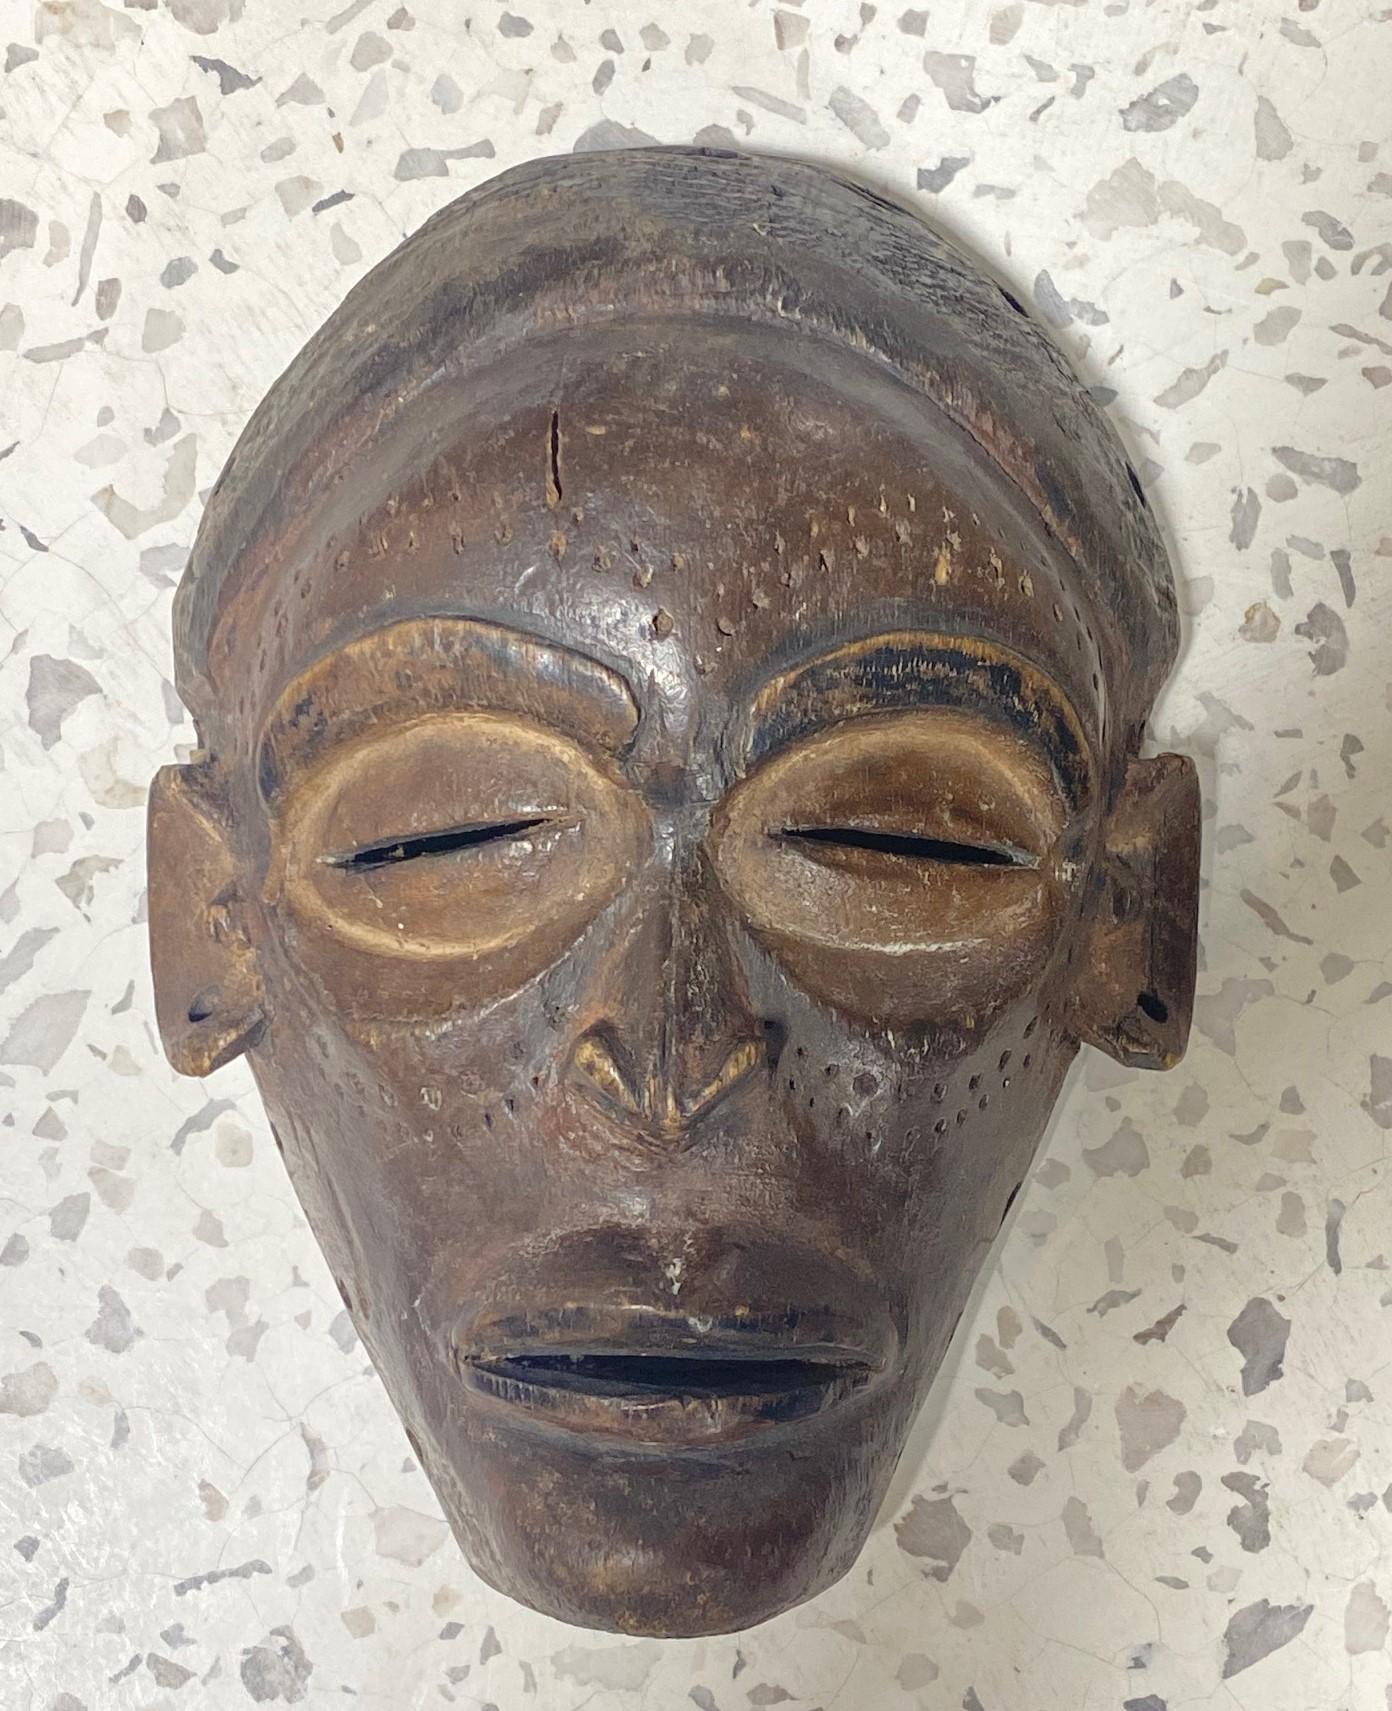 A very engaging mask by the Chowke (Tchokwe) tribe of Southern and Central Africa who today reside primarily in Angola. 

This mask is intricately carved and is recognizable by the use of facial tattoos and scarification - a staple in the Chokwe